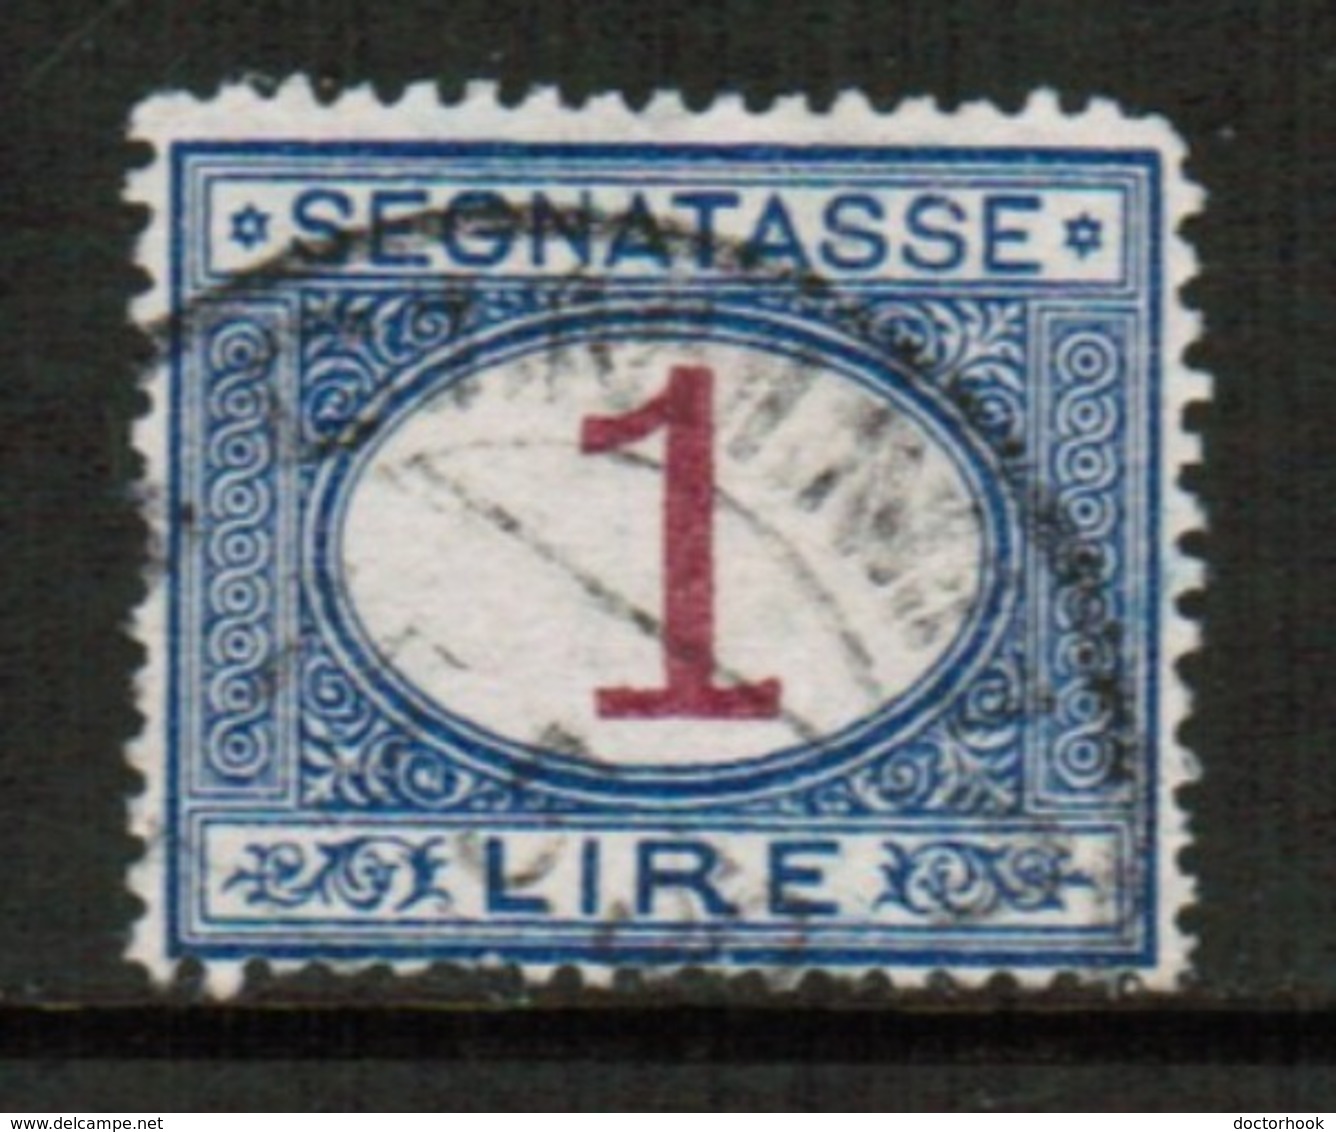 ITALY  Scott # J 14 VF USED  (Stamp Scan # 516) - Postage Due